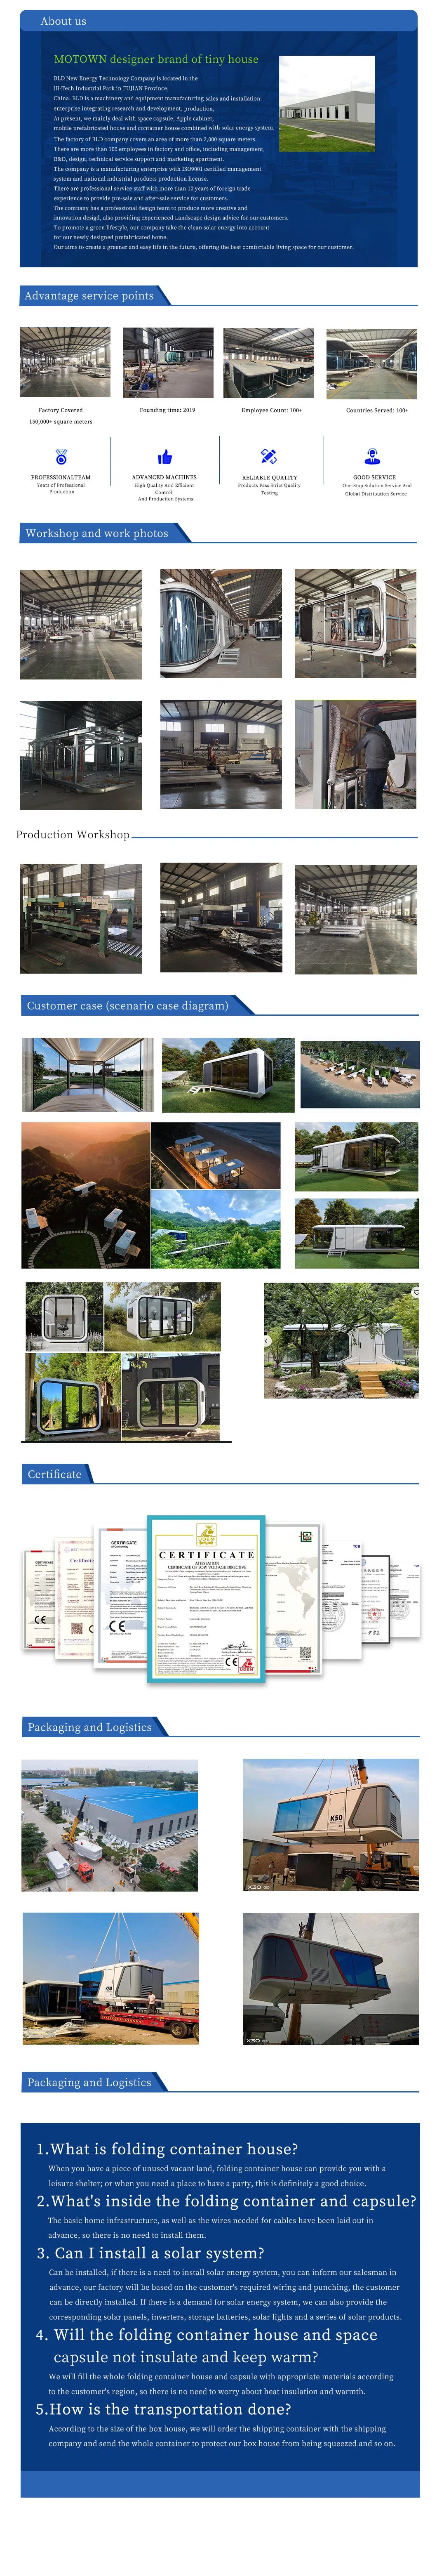 Wholesale FT Residential Mobile Capsule Aluminium Prefab Garden Container Prefabricated Modular Living Space Capsule Movable Smart Tiny Home